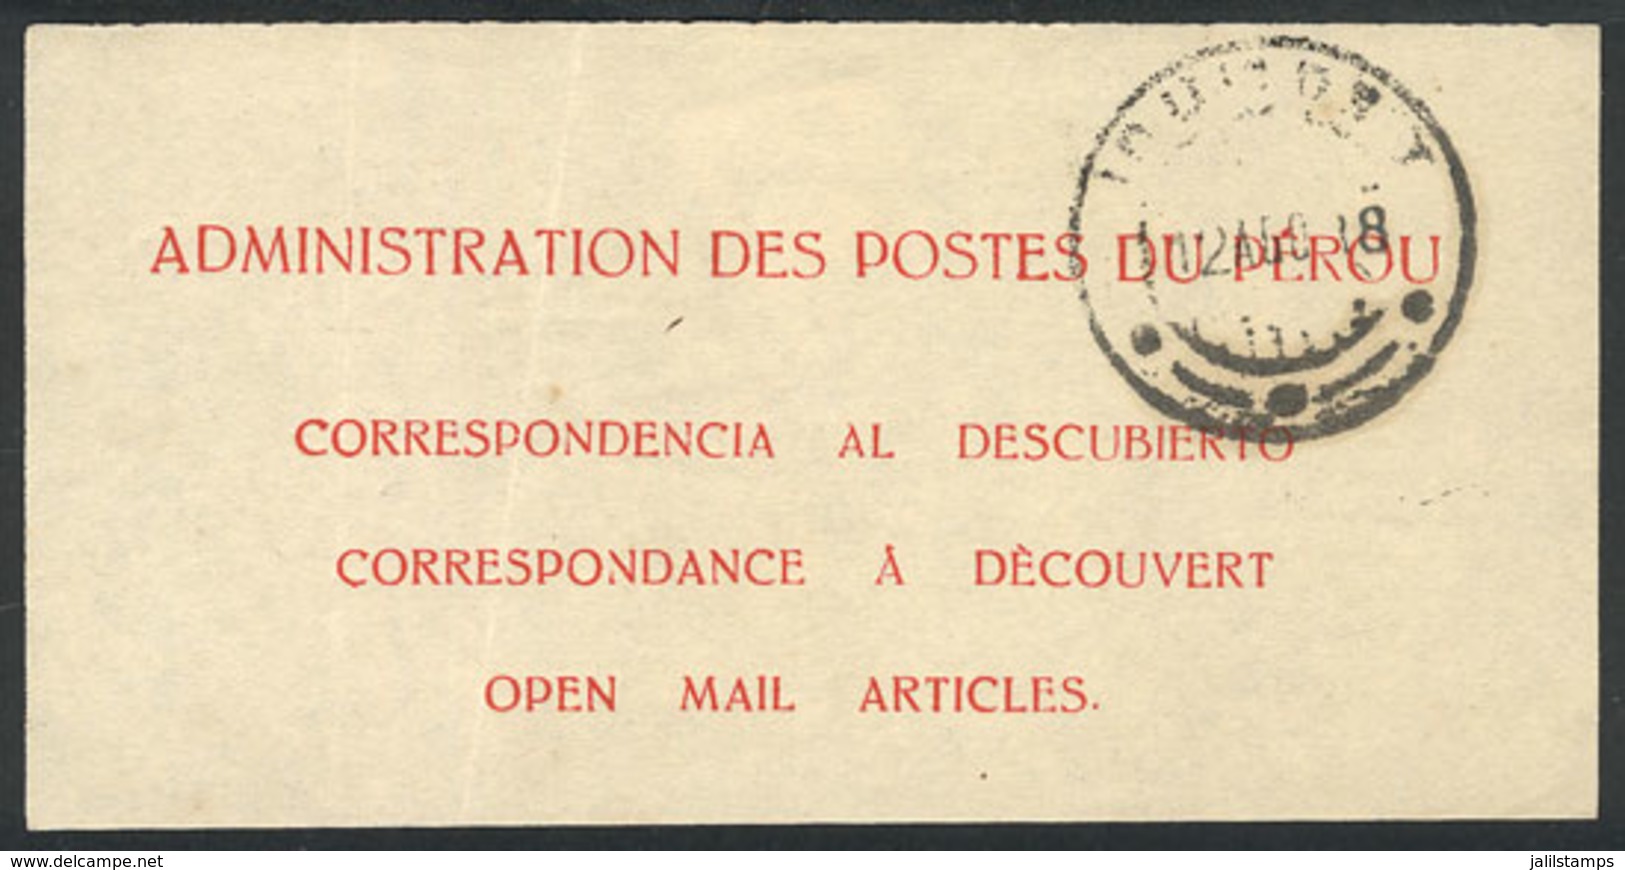 PERU: Postal Label For "OPEN MAIL ARTICLES", Used In Iquique On 12/AU/1938?, VF Quality, Rare!" - Peru